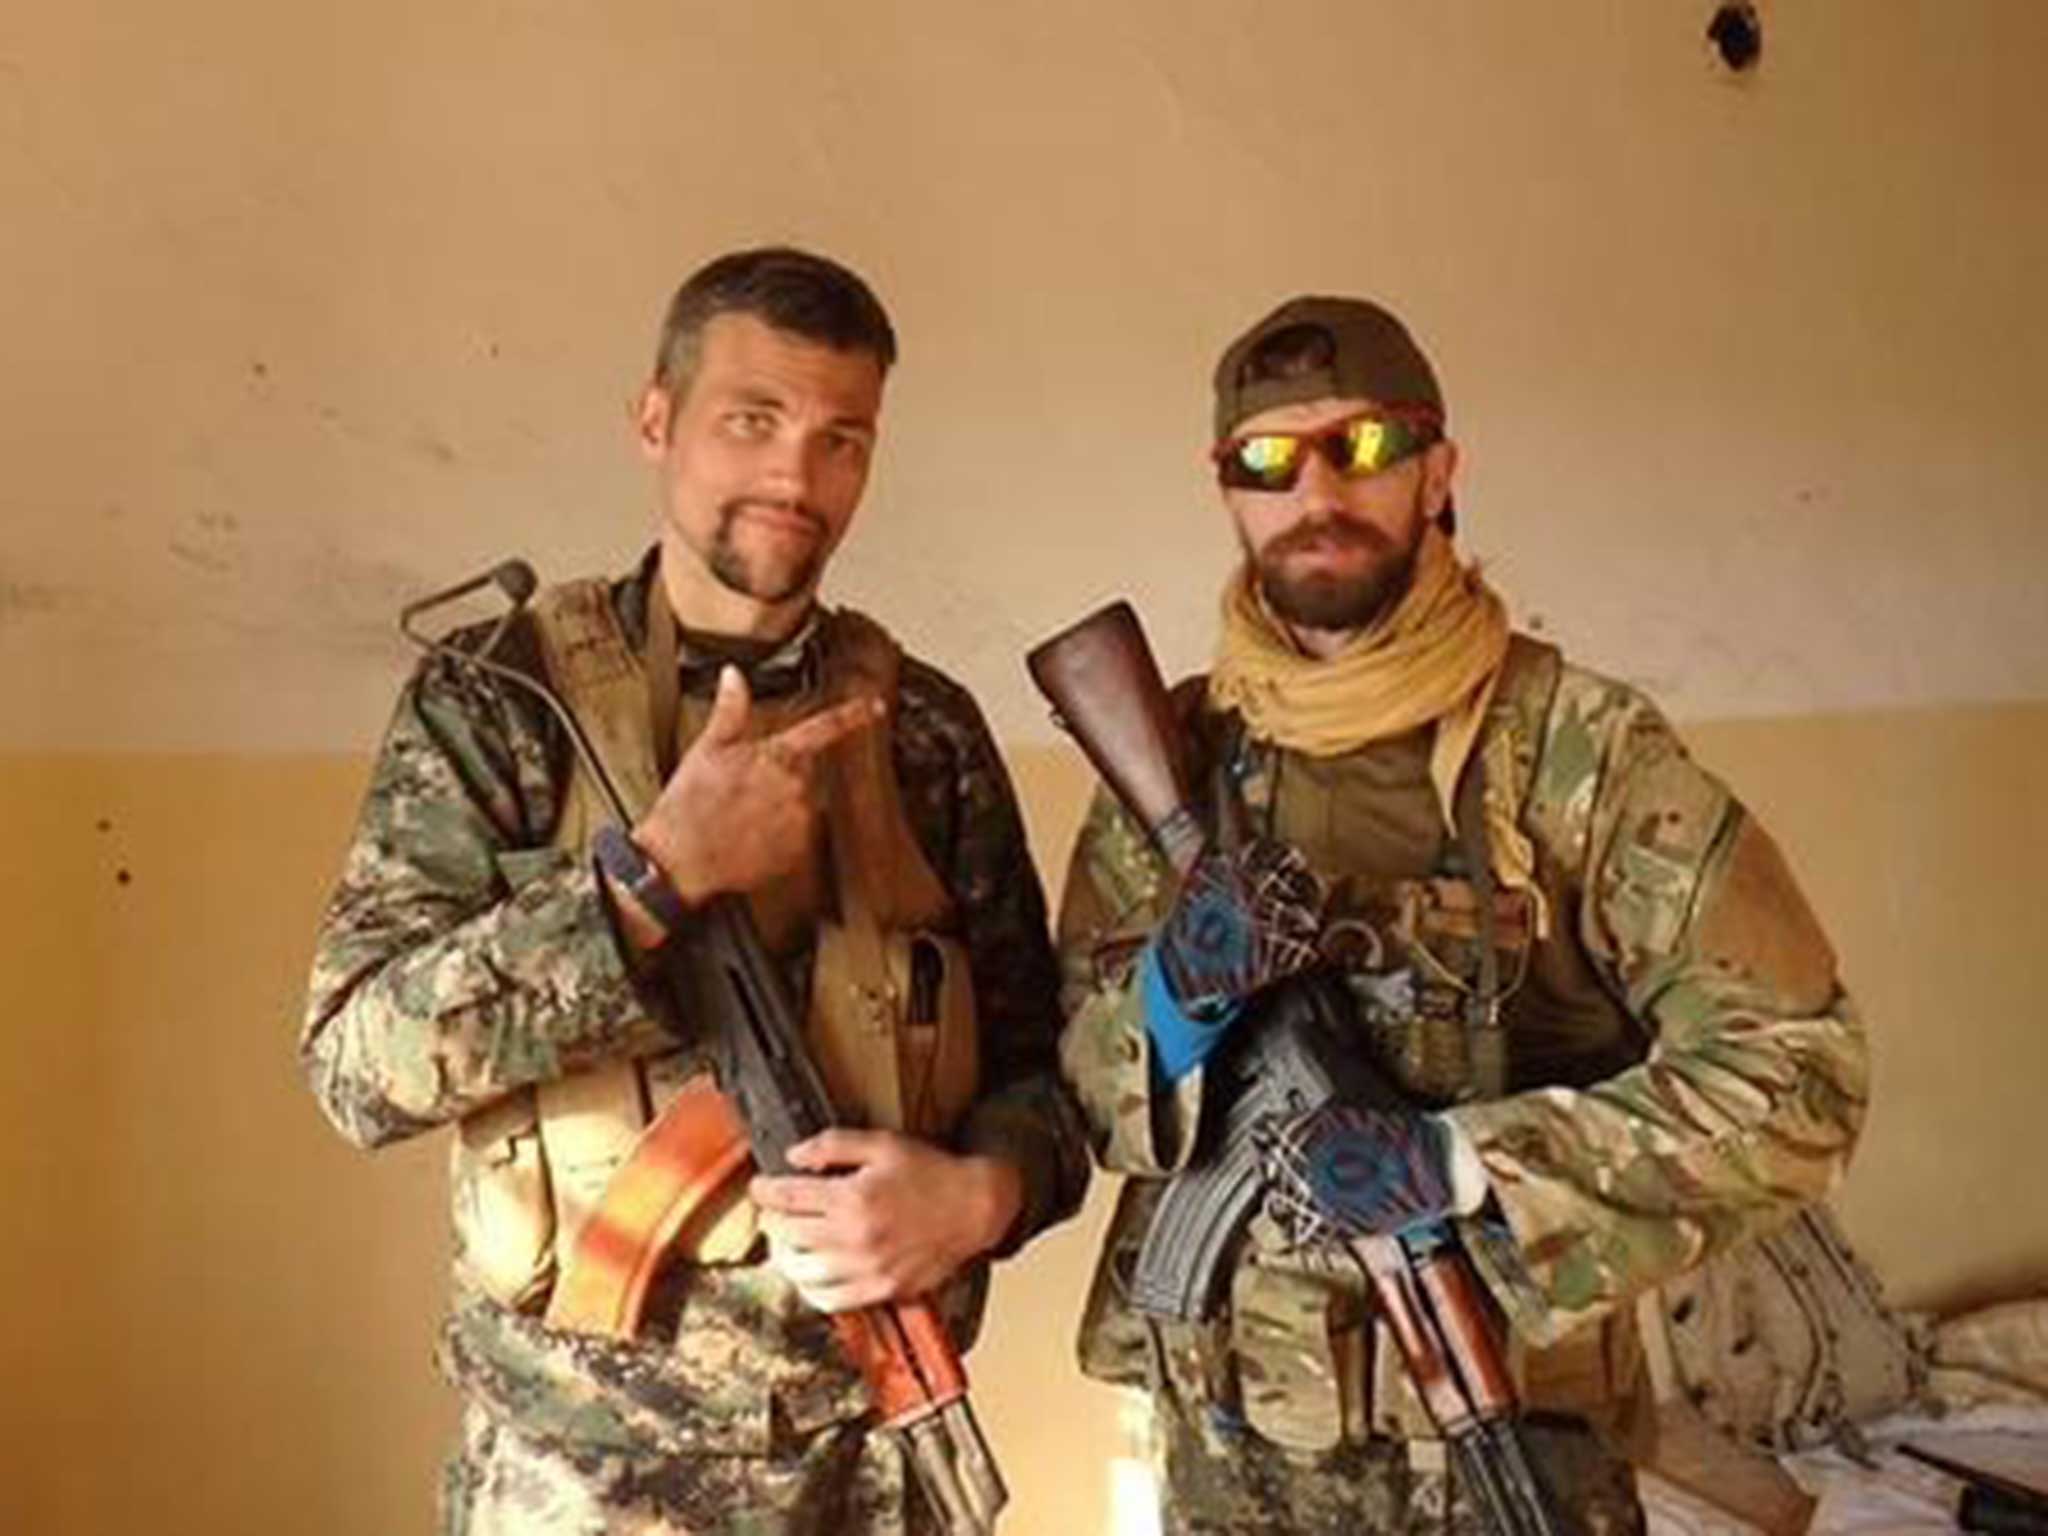 American Jamie Matson with one of the two Britons allegedly fighting in Syria against Isis